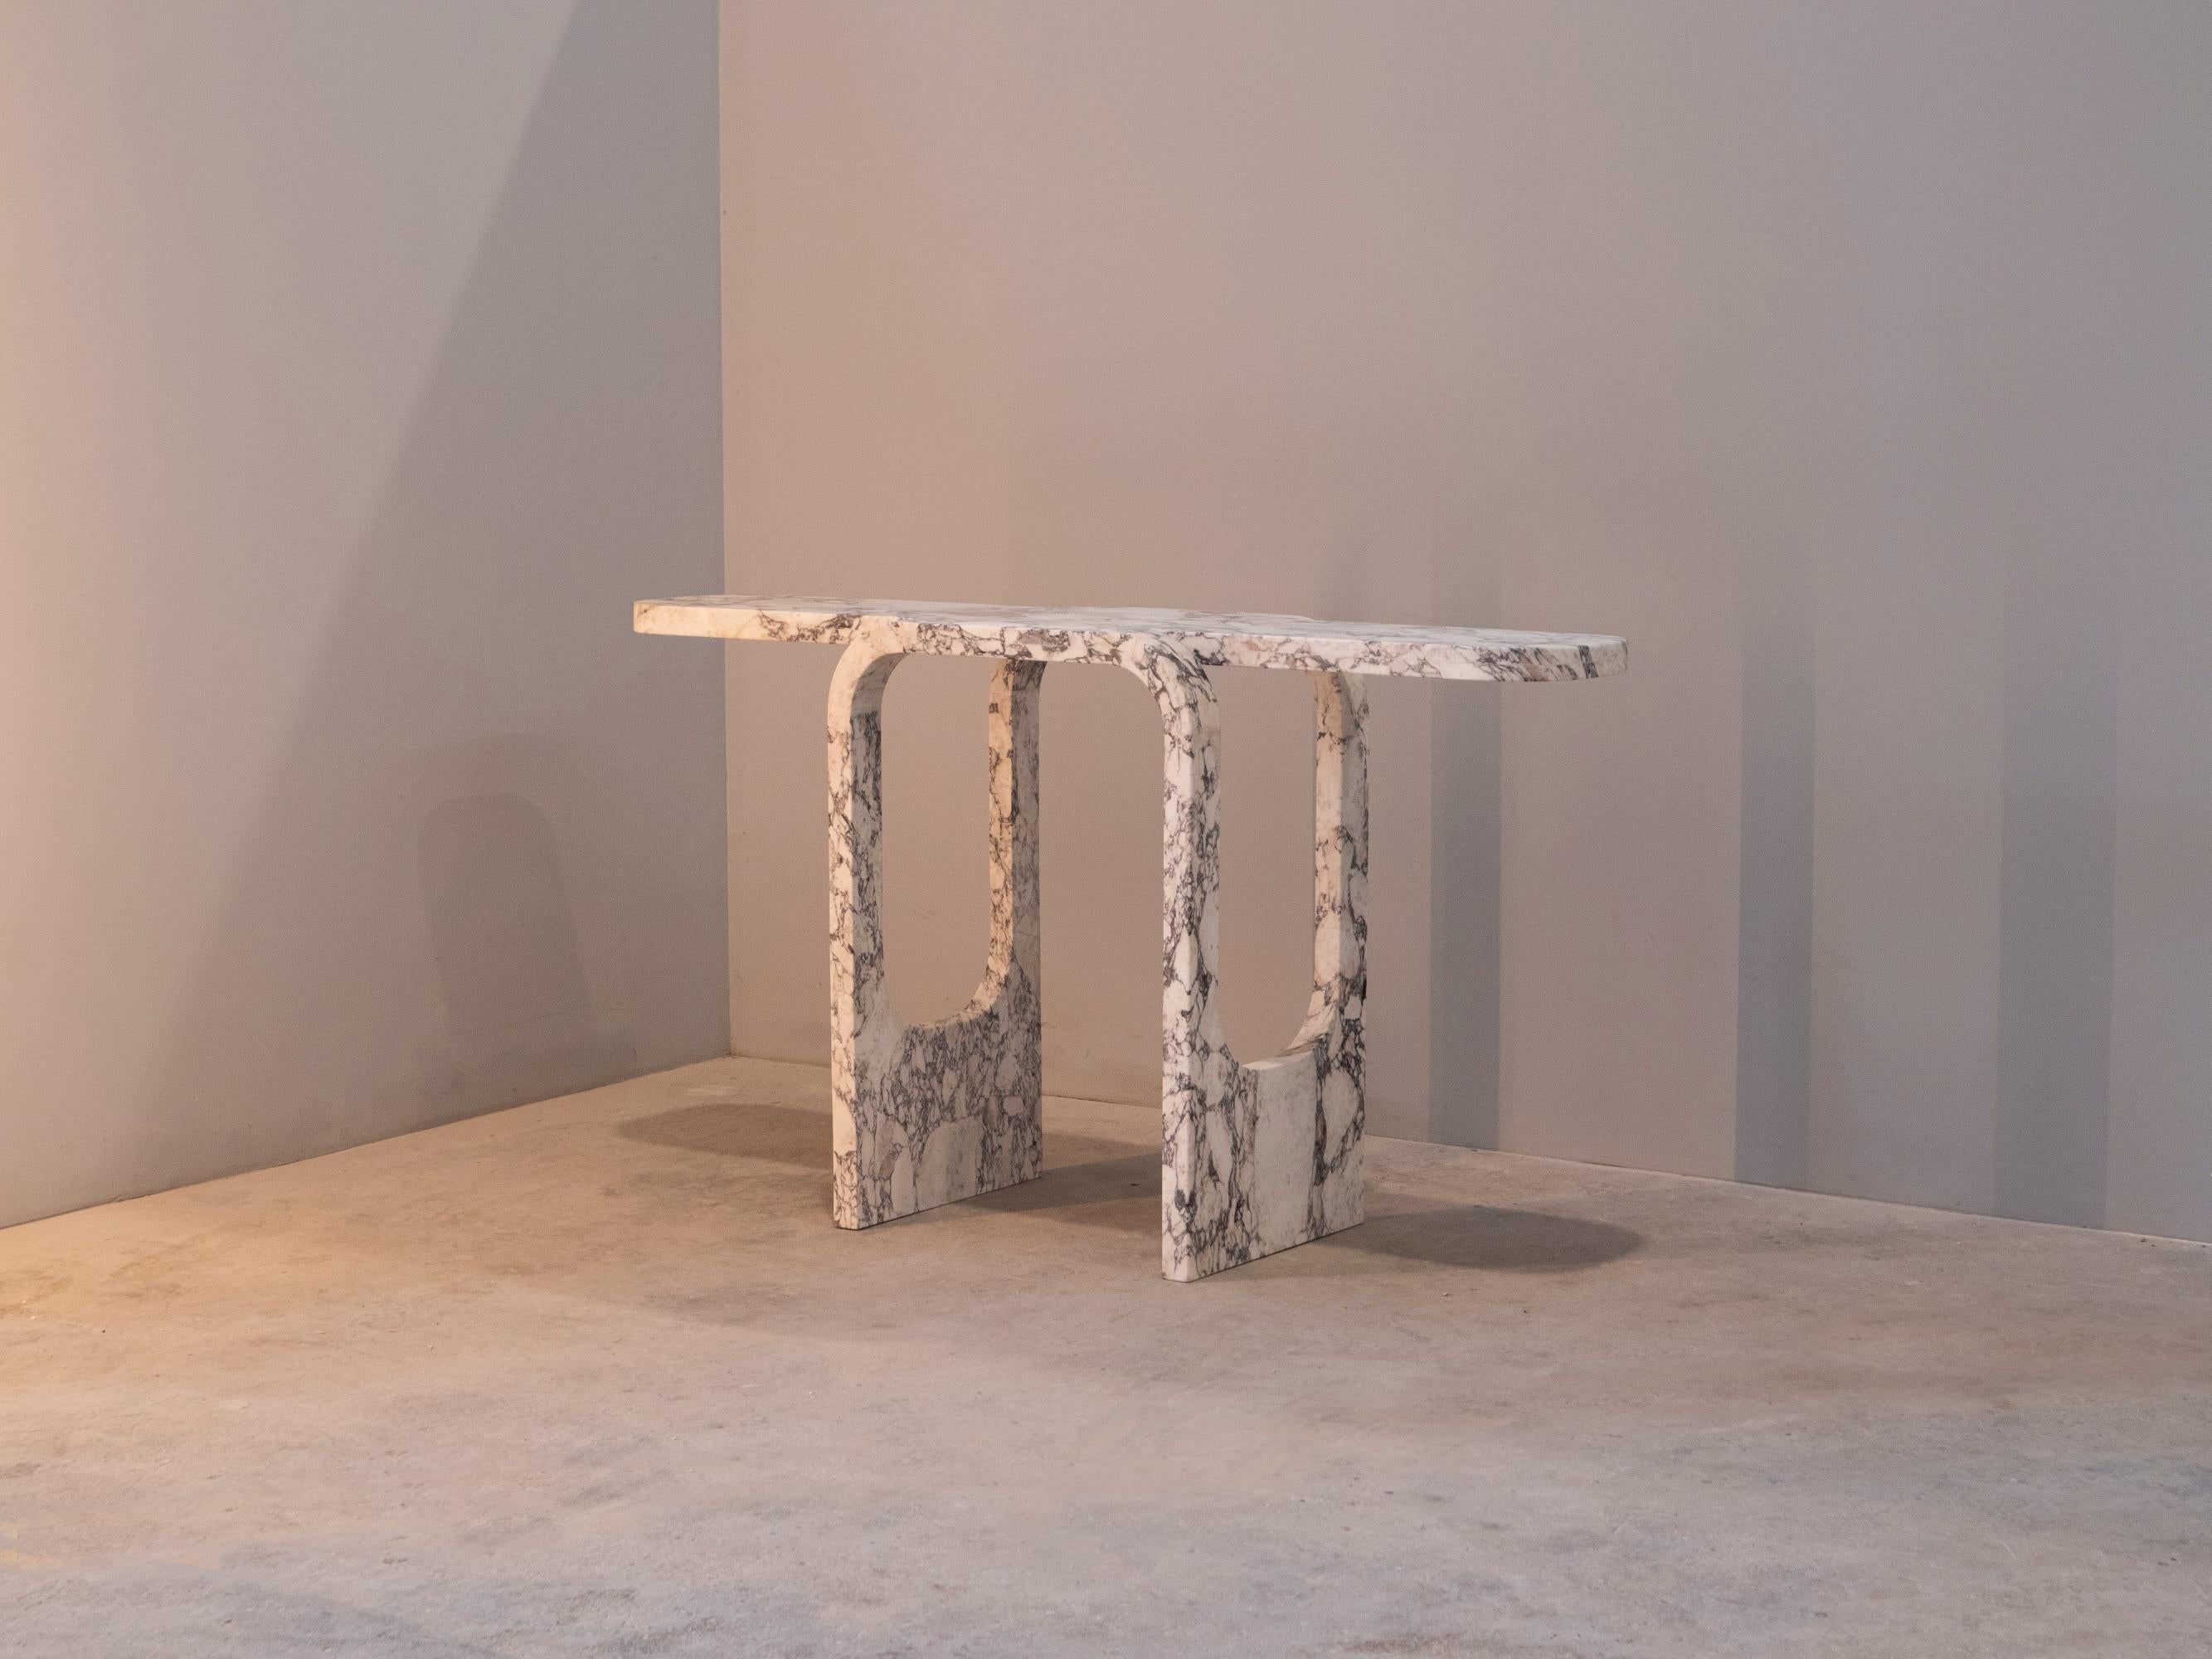 Calcatta viola cut and fold console table by dAM Atelier
Dimensions: W 150 x D 42 x H 80 cm
Materials: Calacatta viola marble.


dAM atelier is a duo of young Italian architects sharing the passion for design and architecture, Paolo